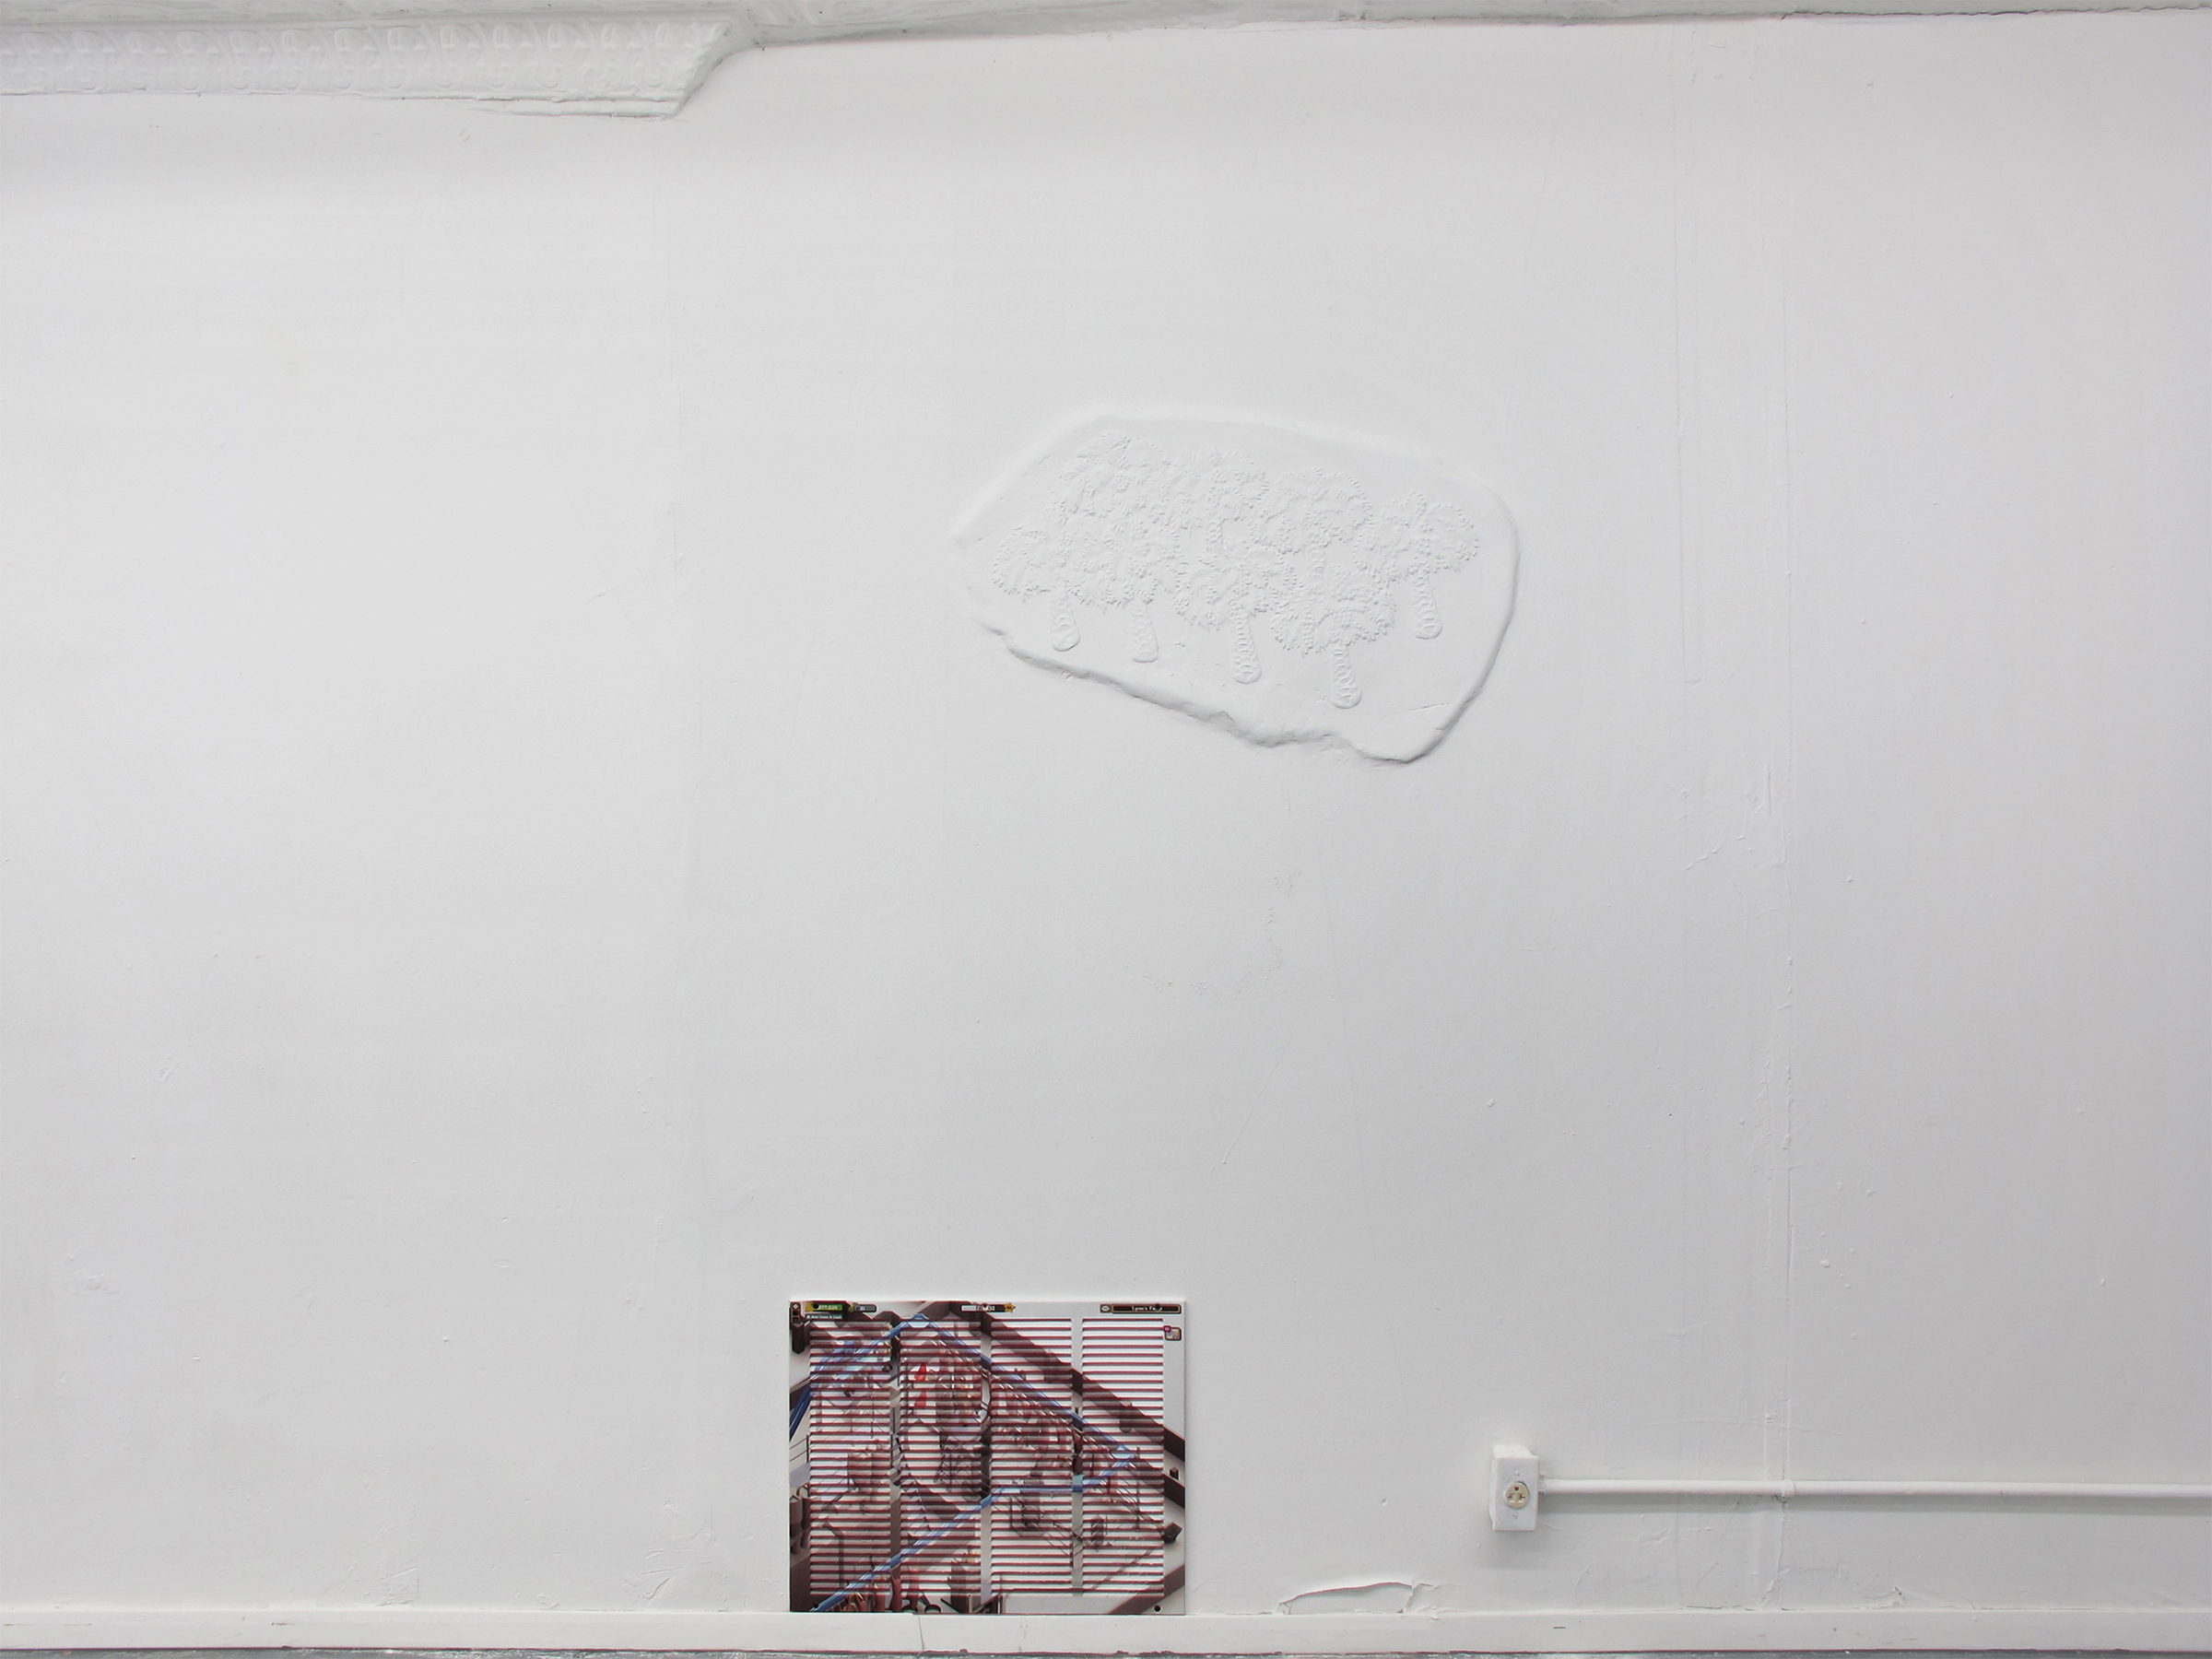  Installation view,&nbsp; Hangry , STL, NY, 2015 